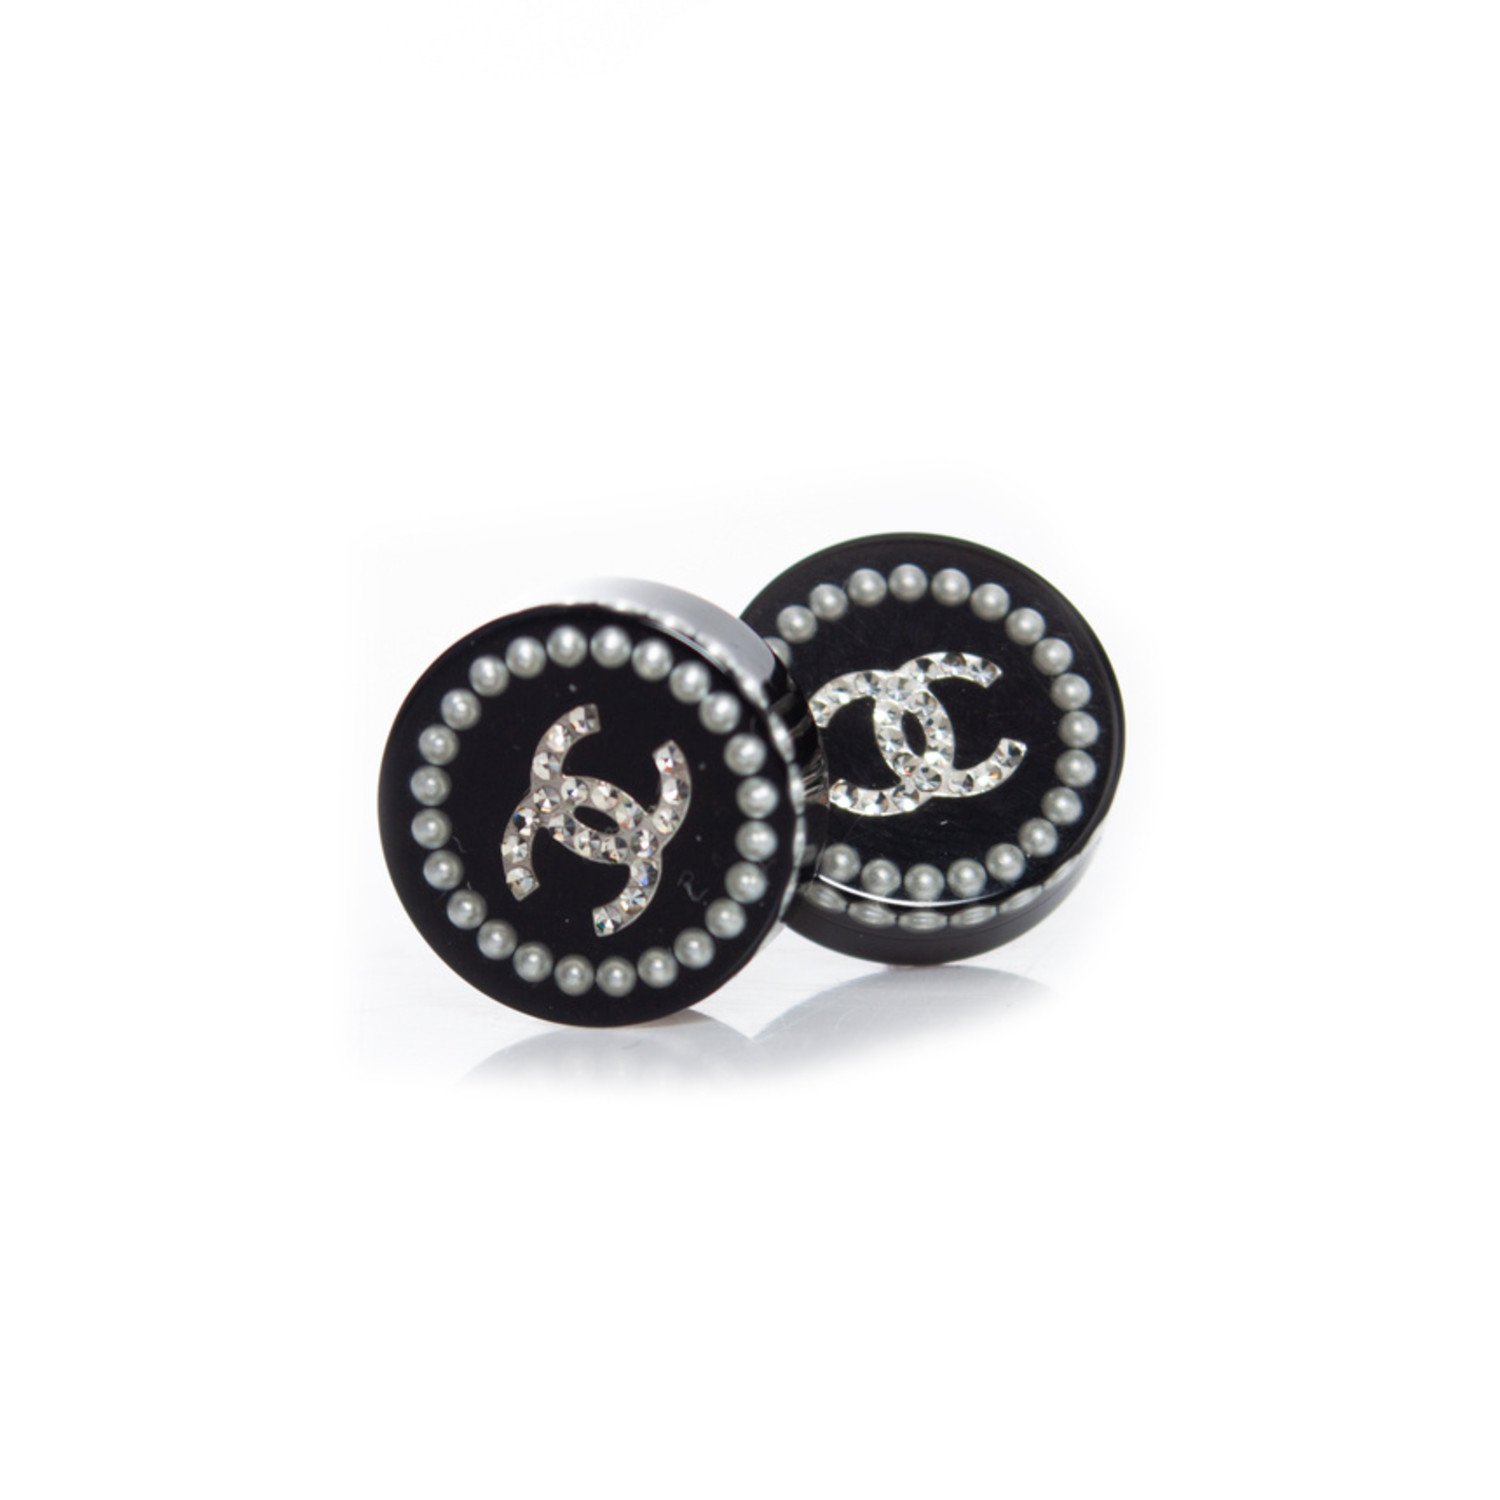 chanel earrings cc logo with pearls